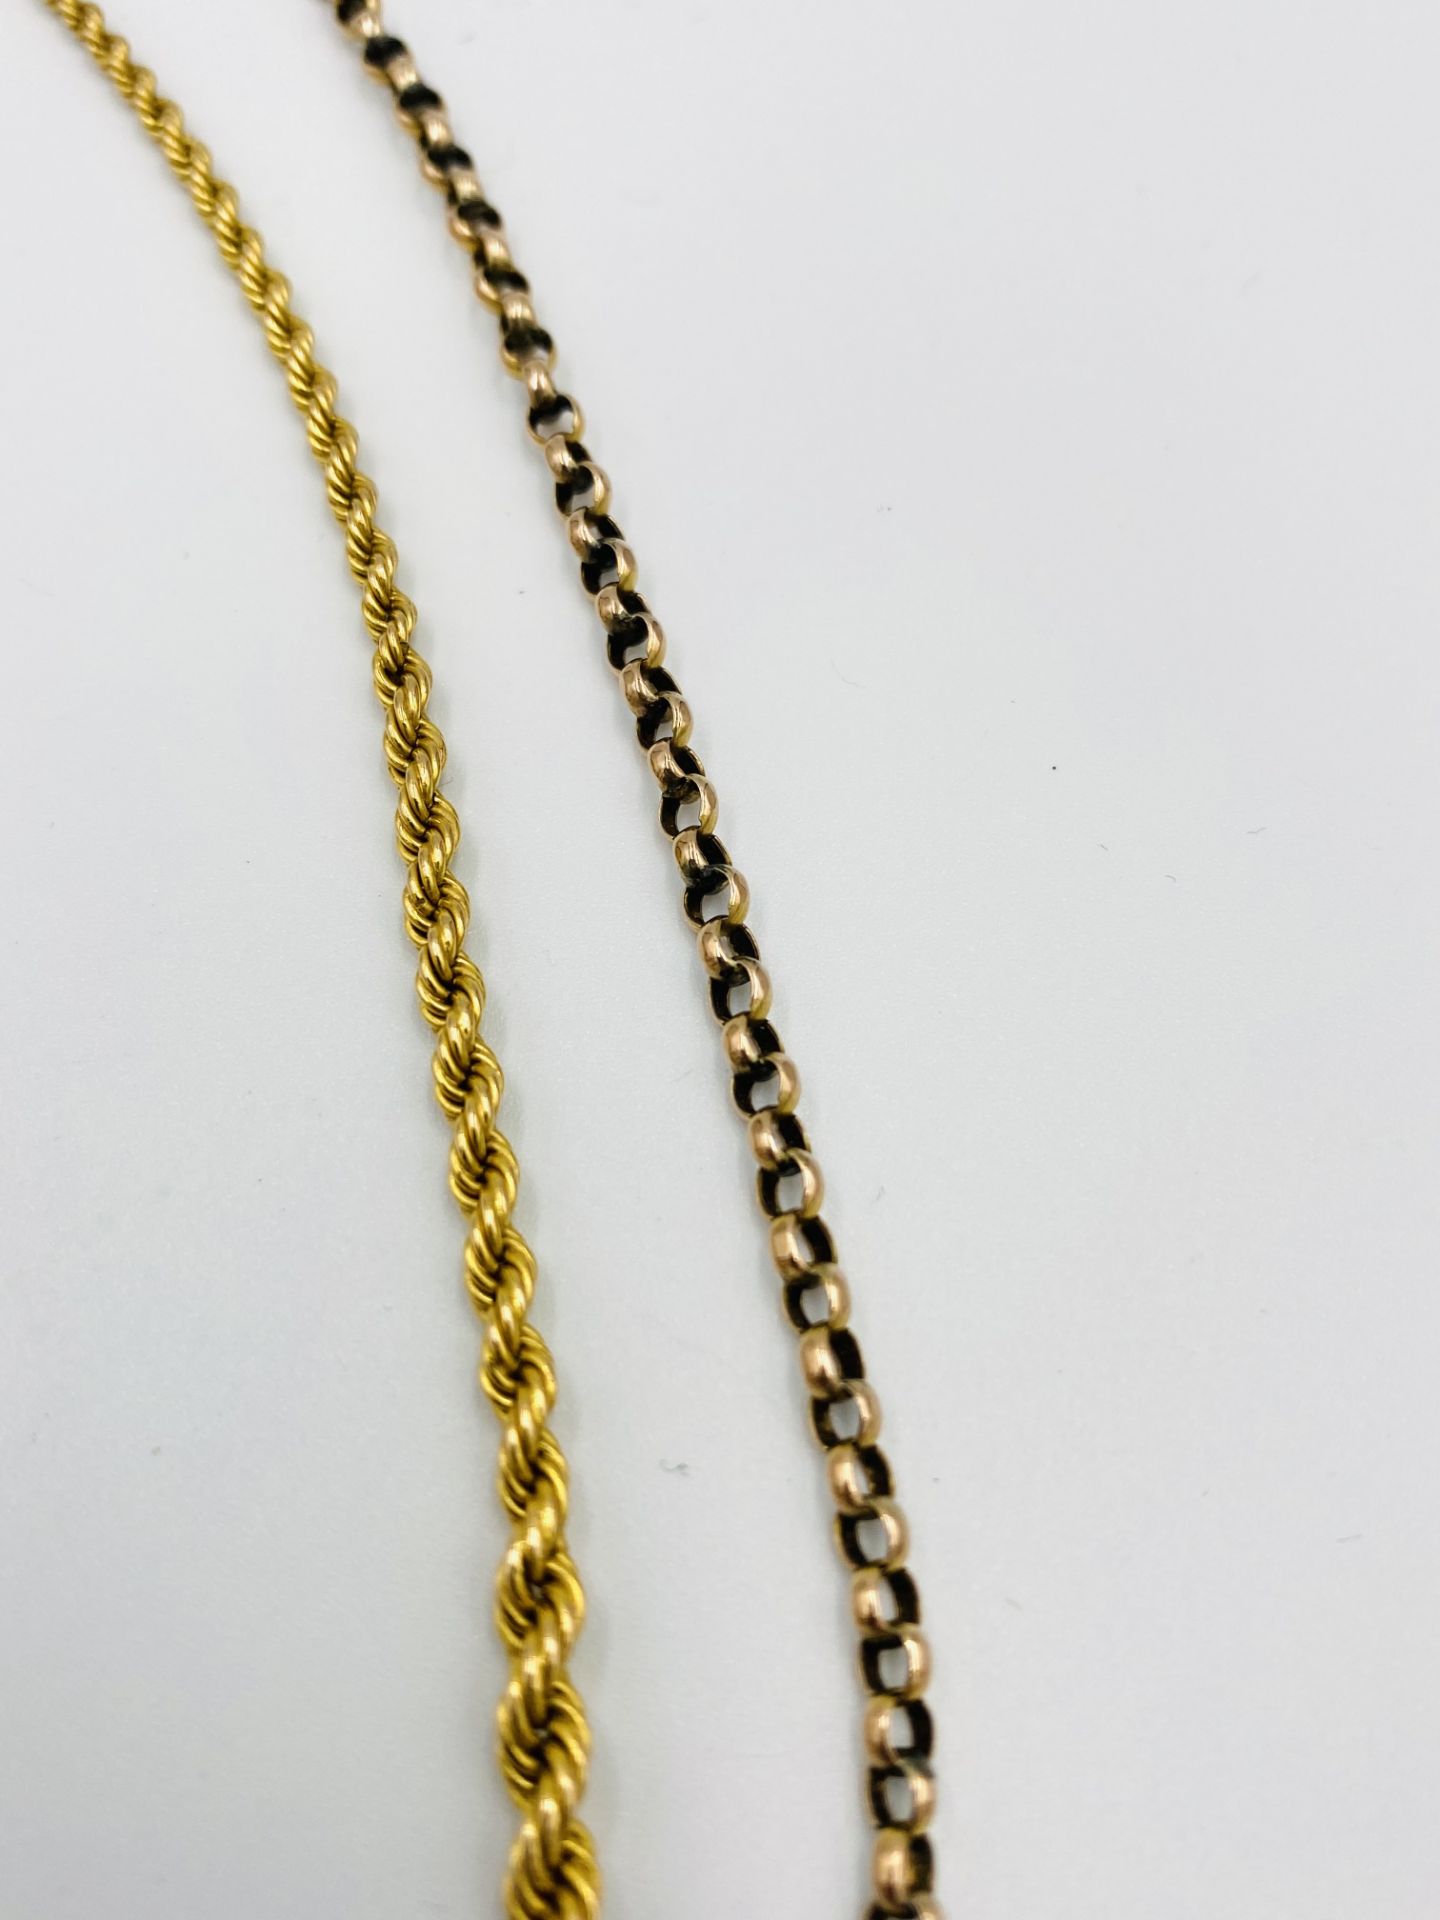 9ct gold link chain together with a gold plated rope twist chain - Image 3 of 6